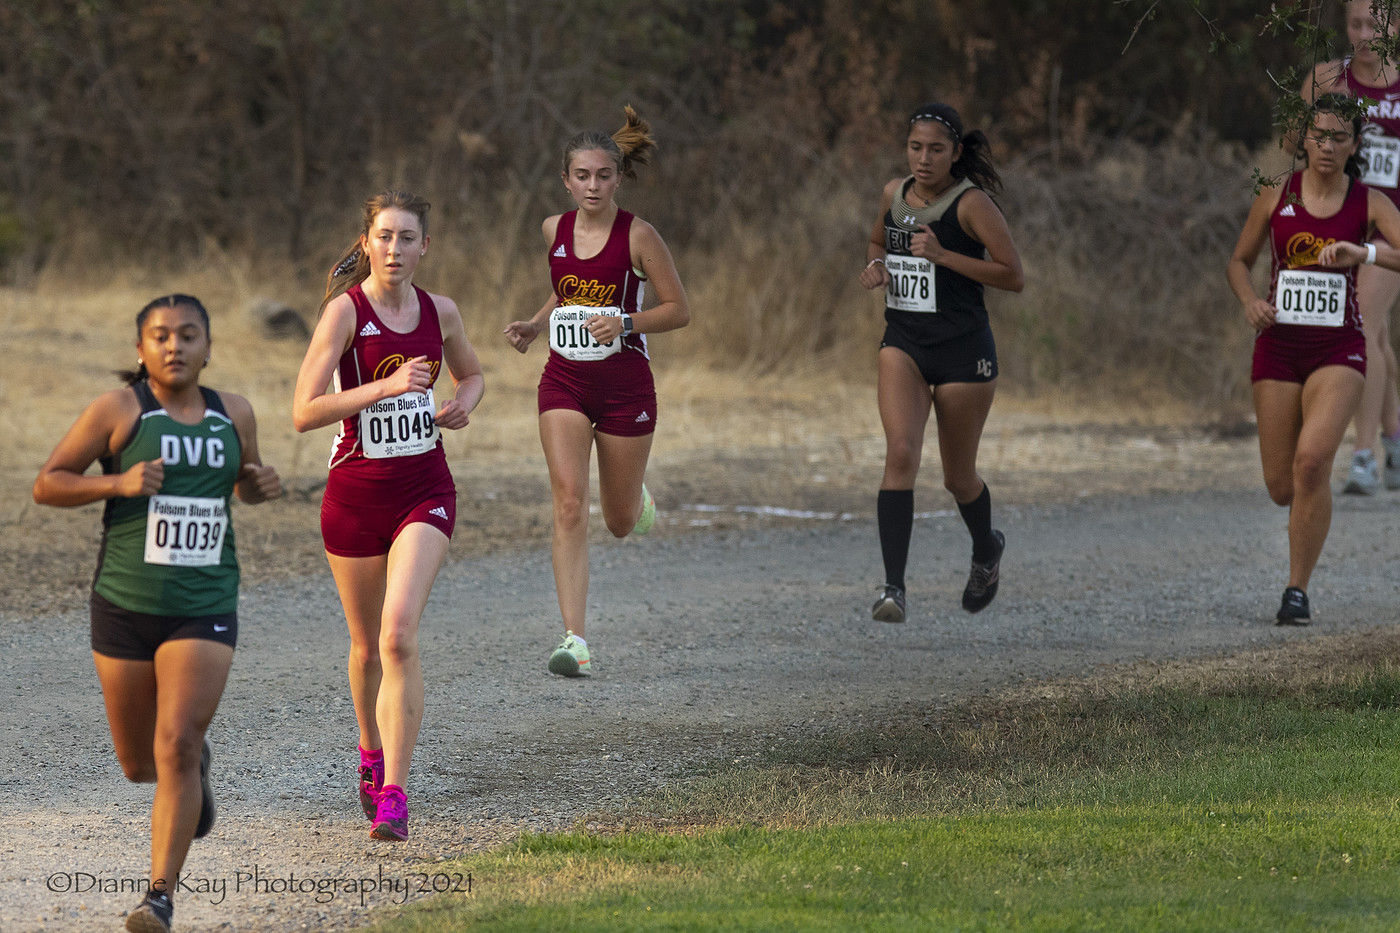 Women's Cross Country finishes 2nd in the Big 8 Preview; Combrink finishes 9th overall to lead the Panthers